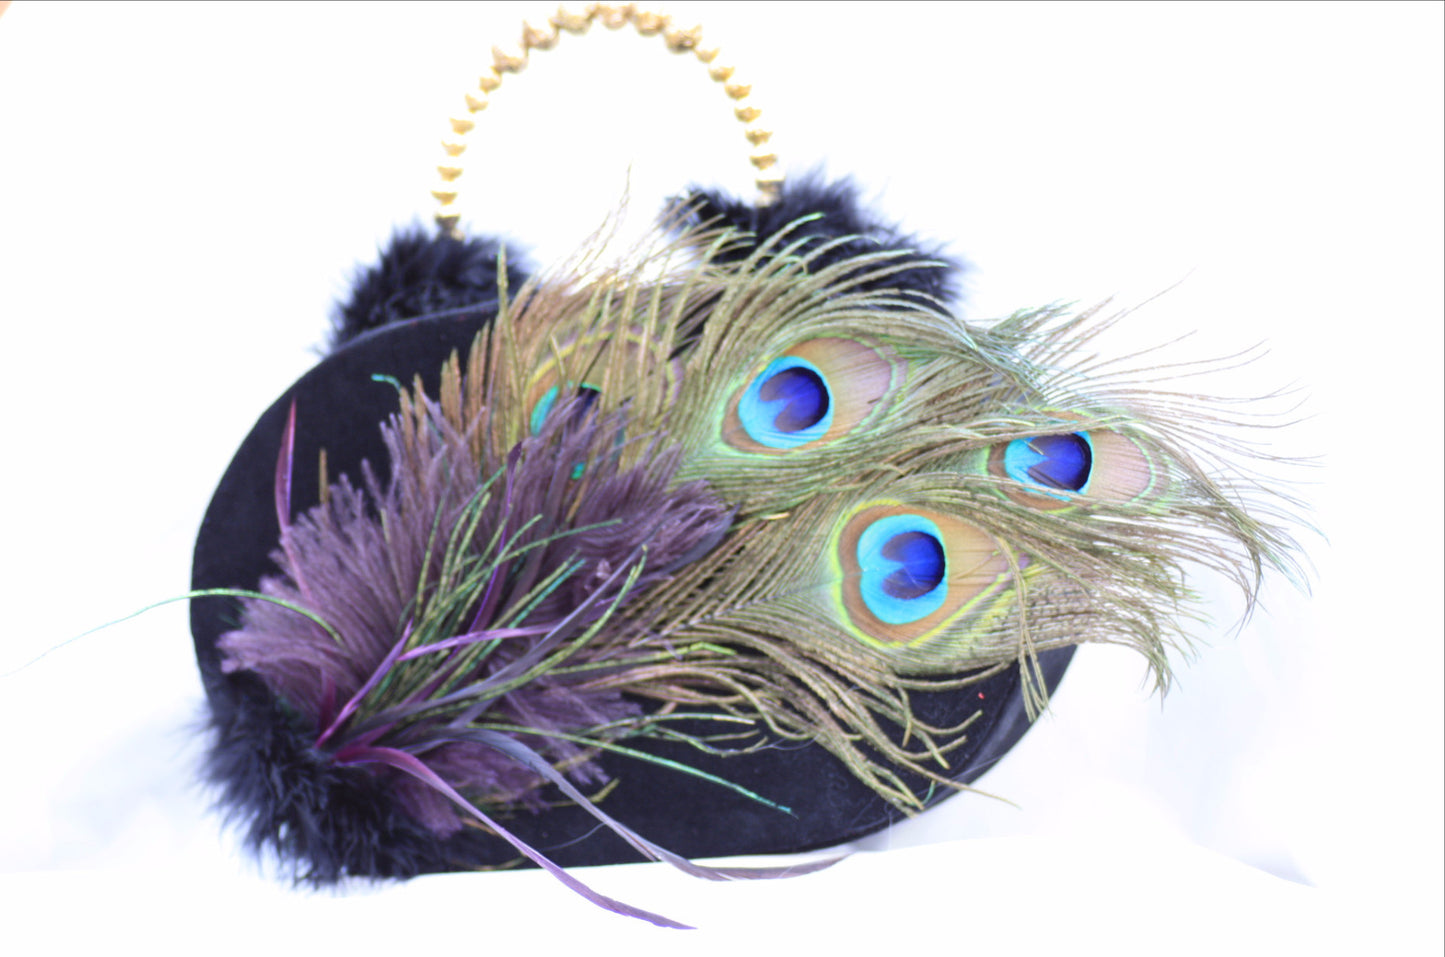 novelty wood based purse designed in black velvet and embellished with peacock feathers and gold handle